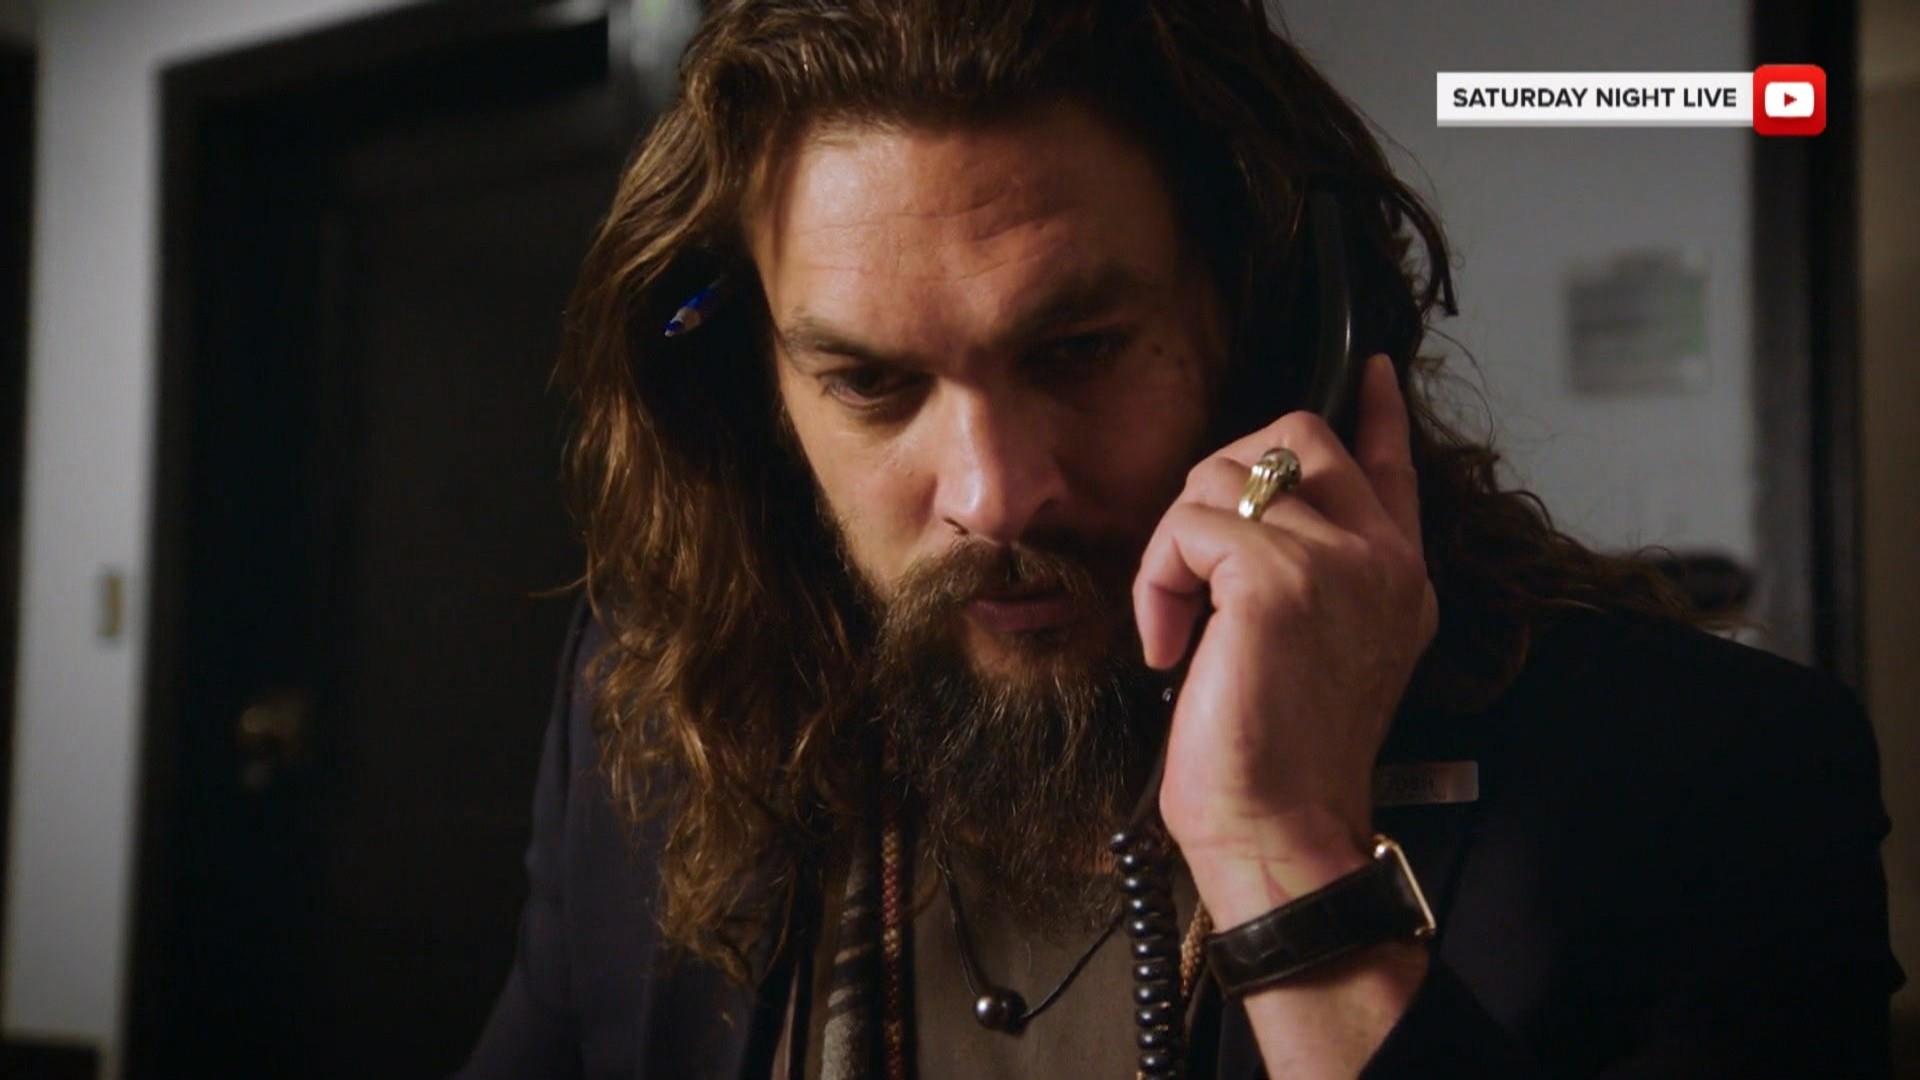 Jason Momoa is an action hero-turned-NBC page in 'SNL' promo